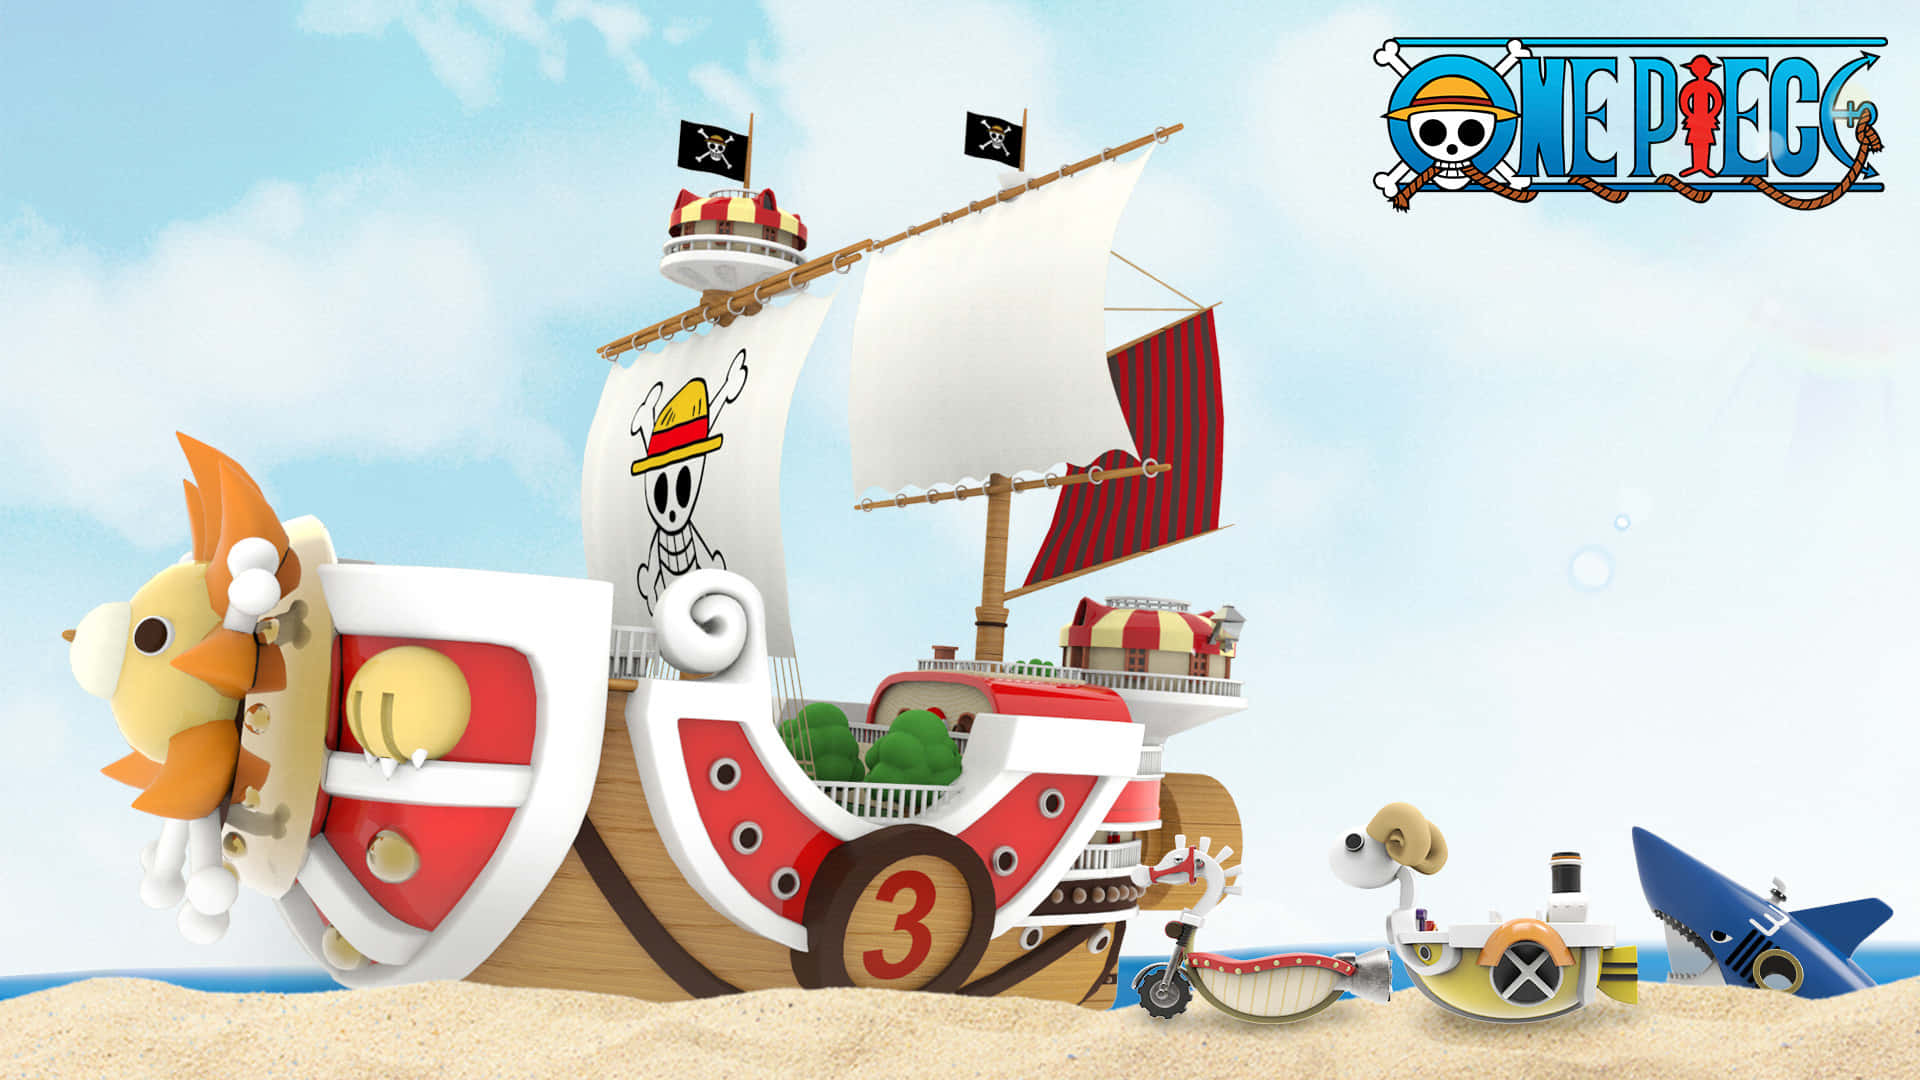 Prove That You're a True One Piece Fan with Thousand Sunny Wallpaper Wallpaper